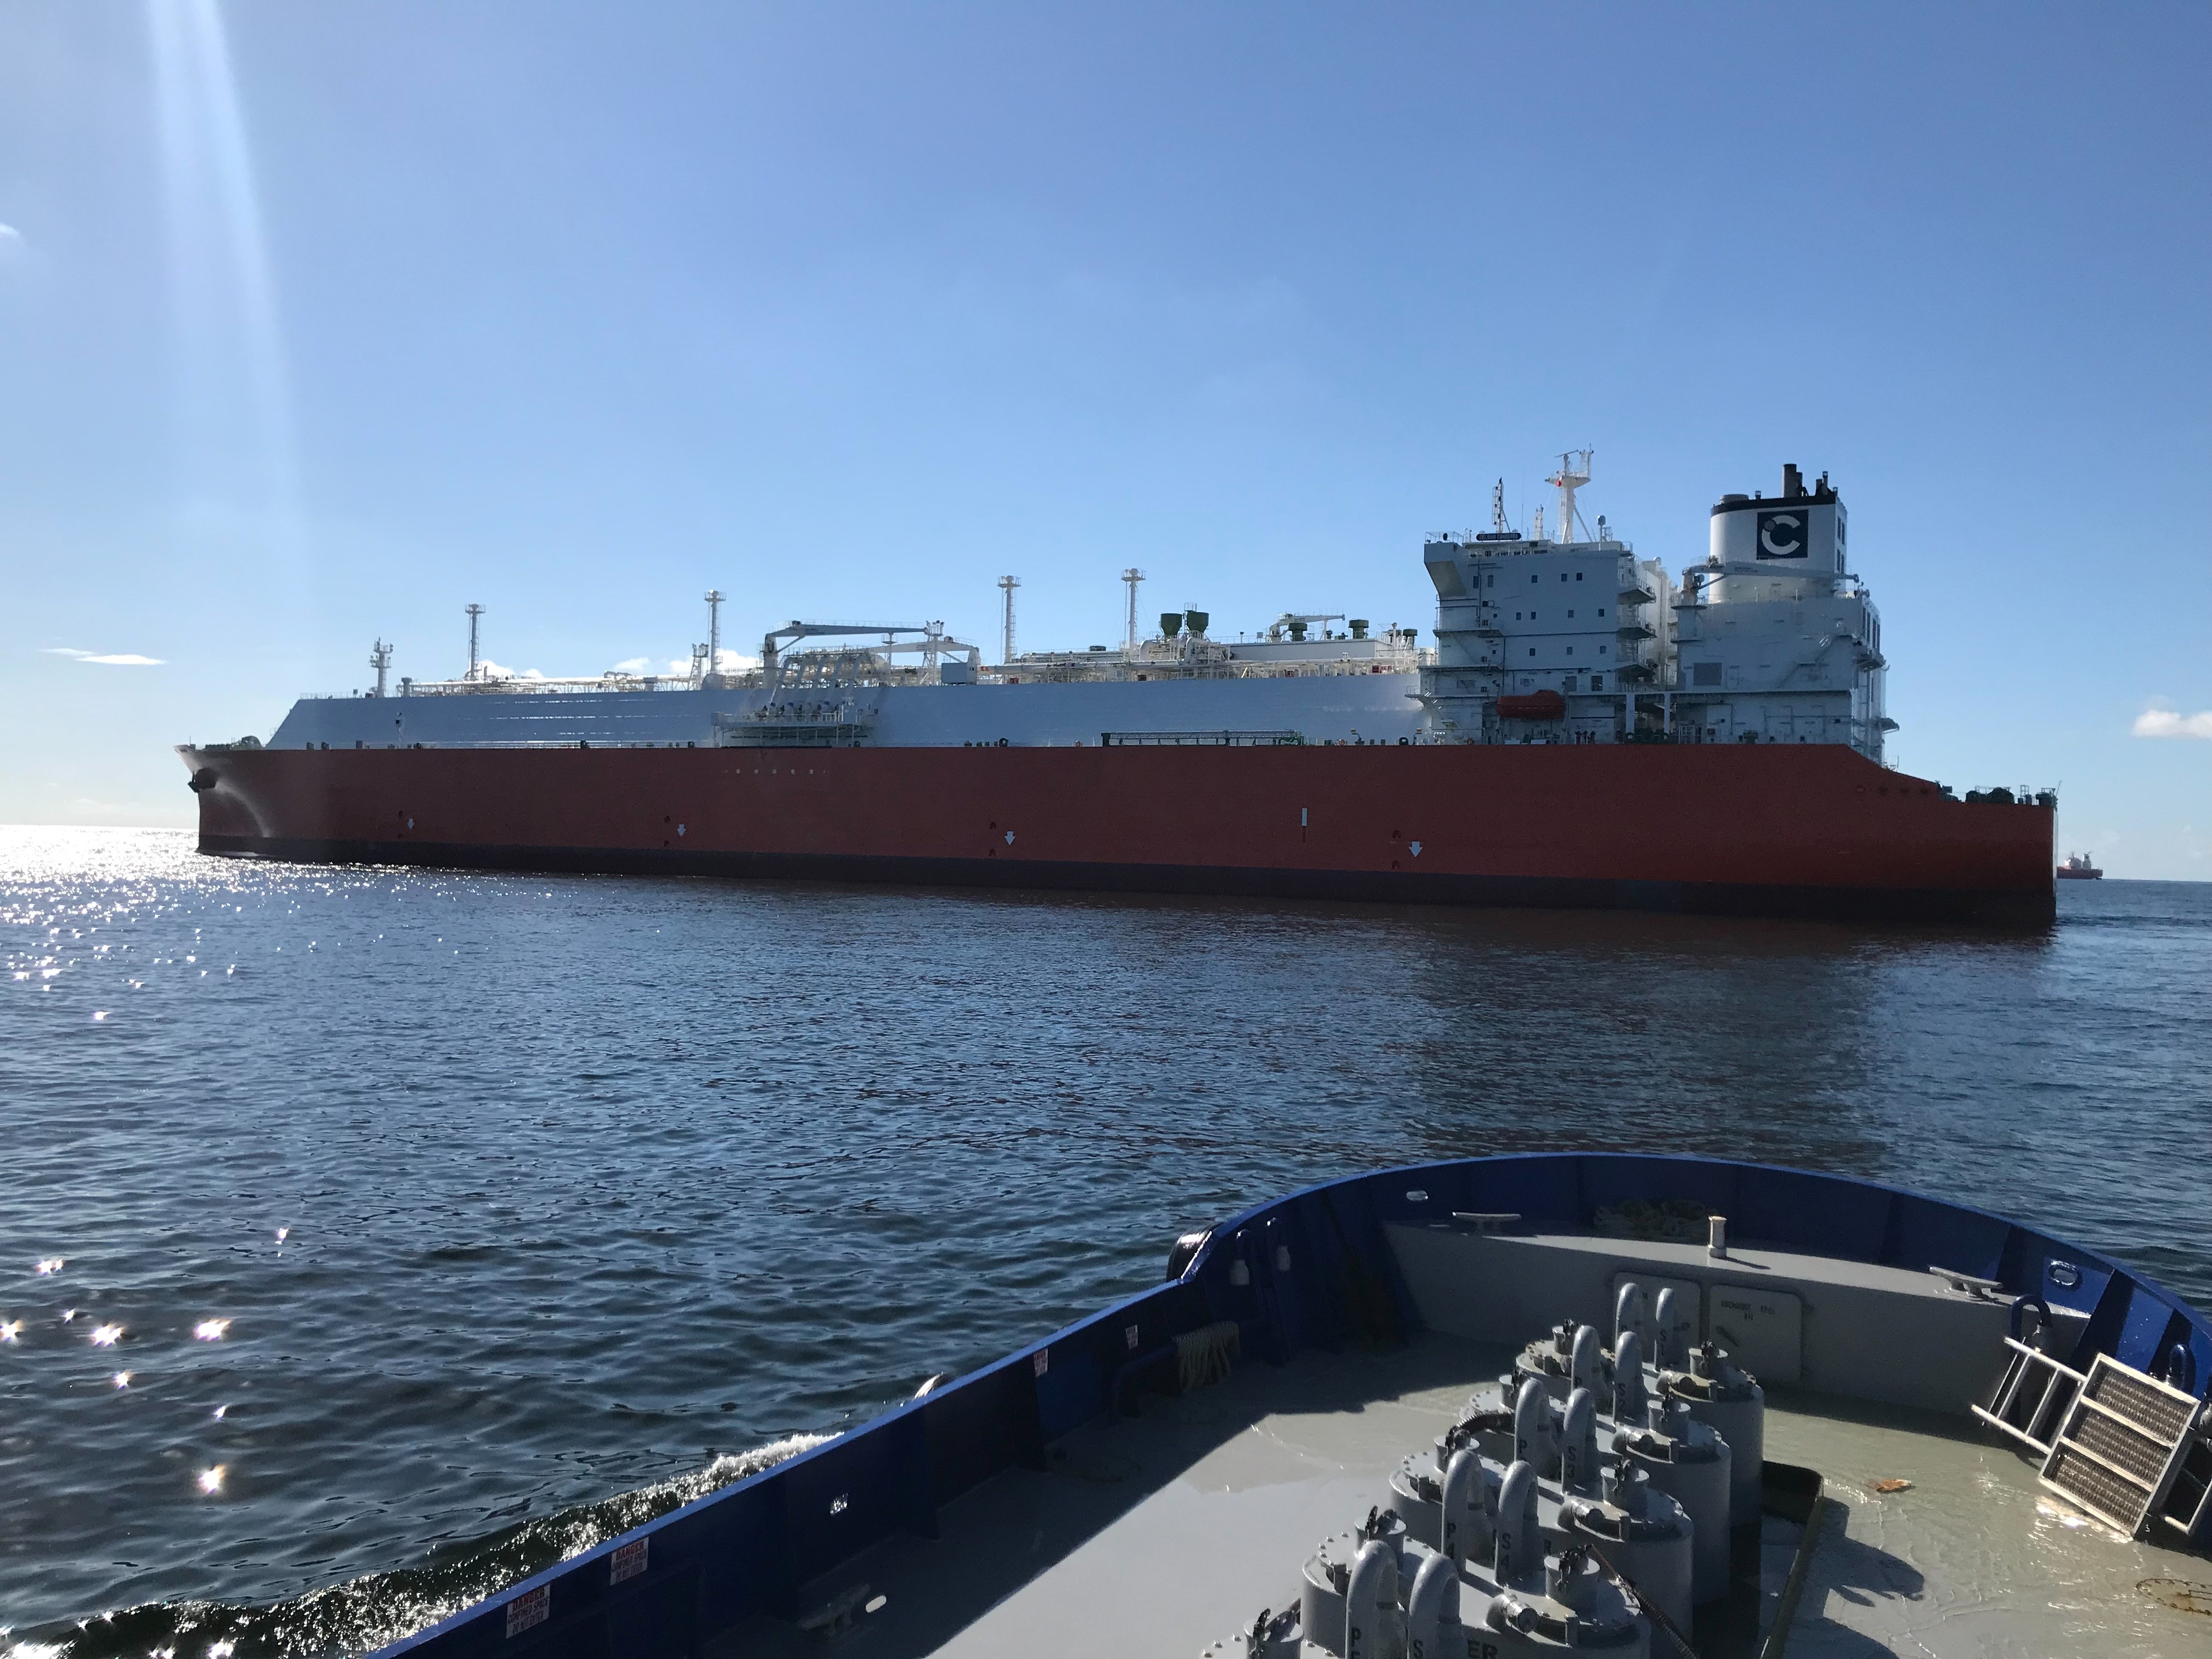 Picture of the LNG tanker Celsius Canberra taken from a barge